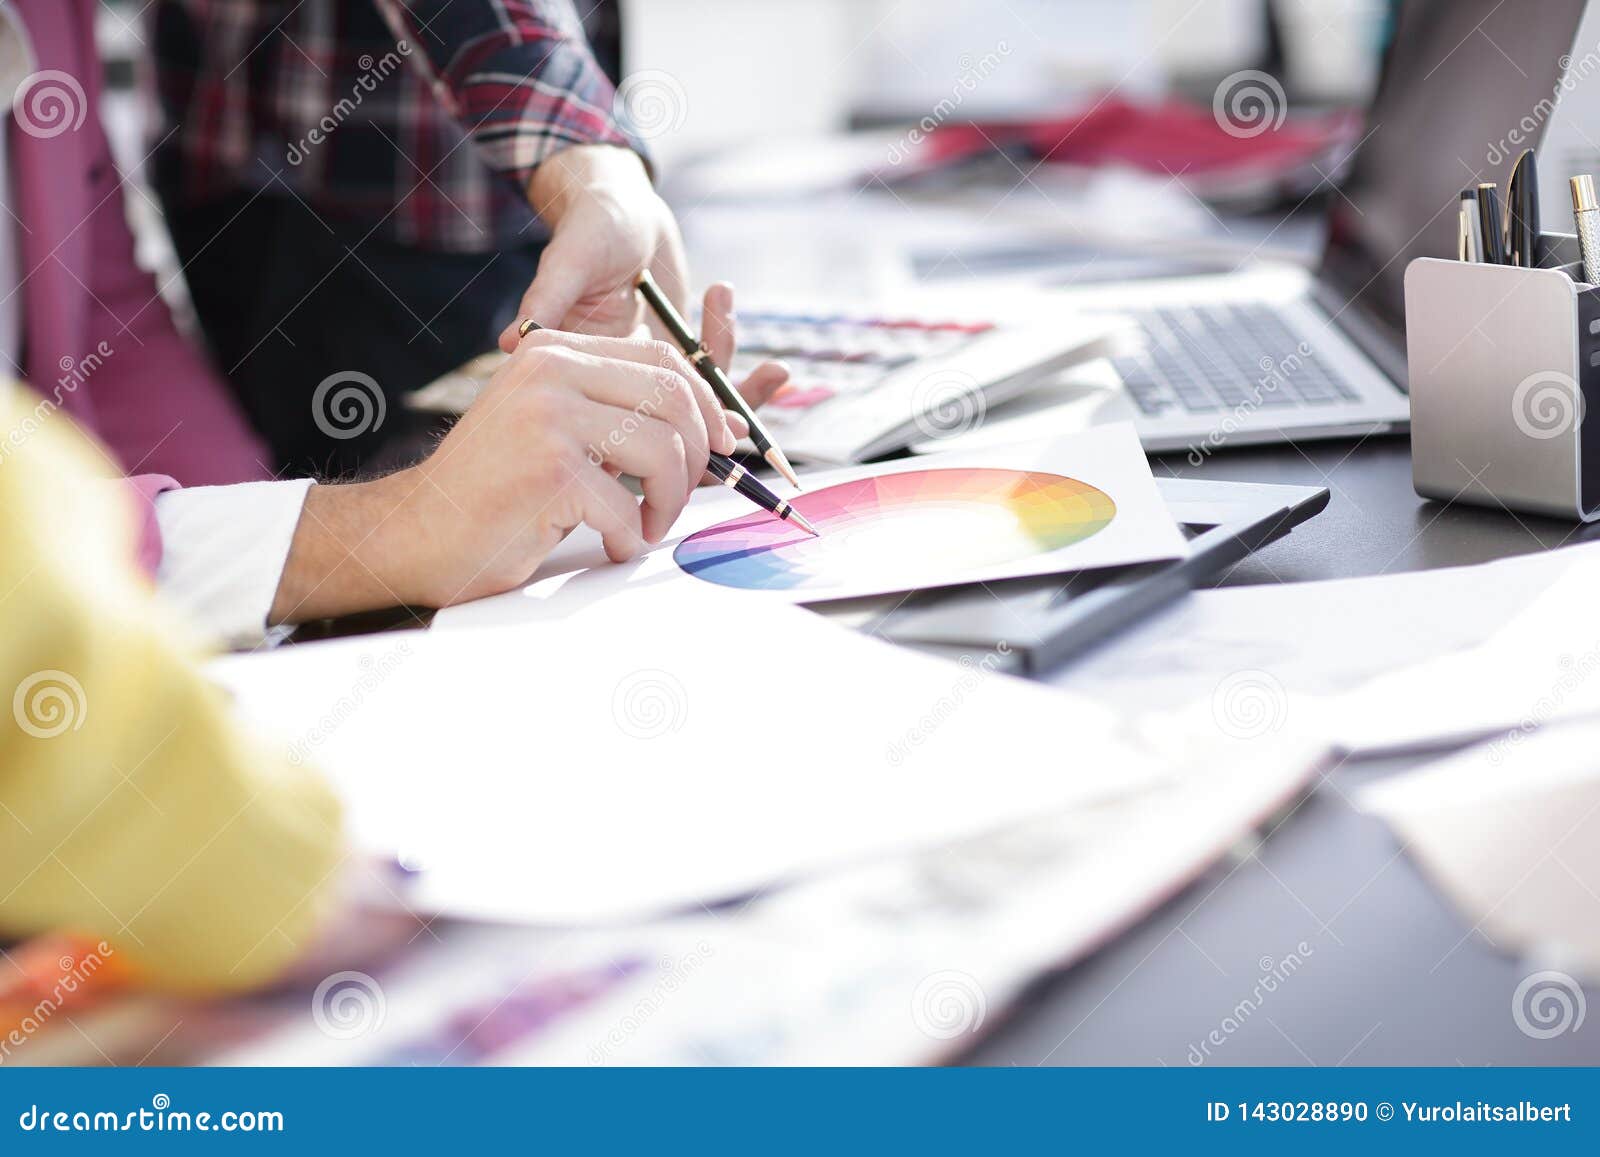 Close Up Designer Working At Office Desk With Blueprints For A New